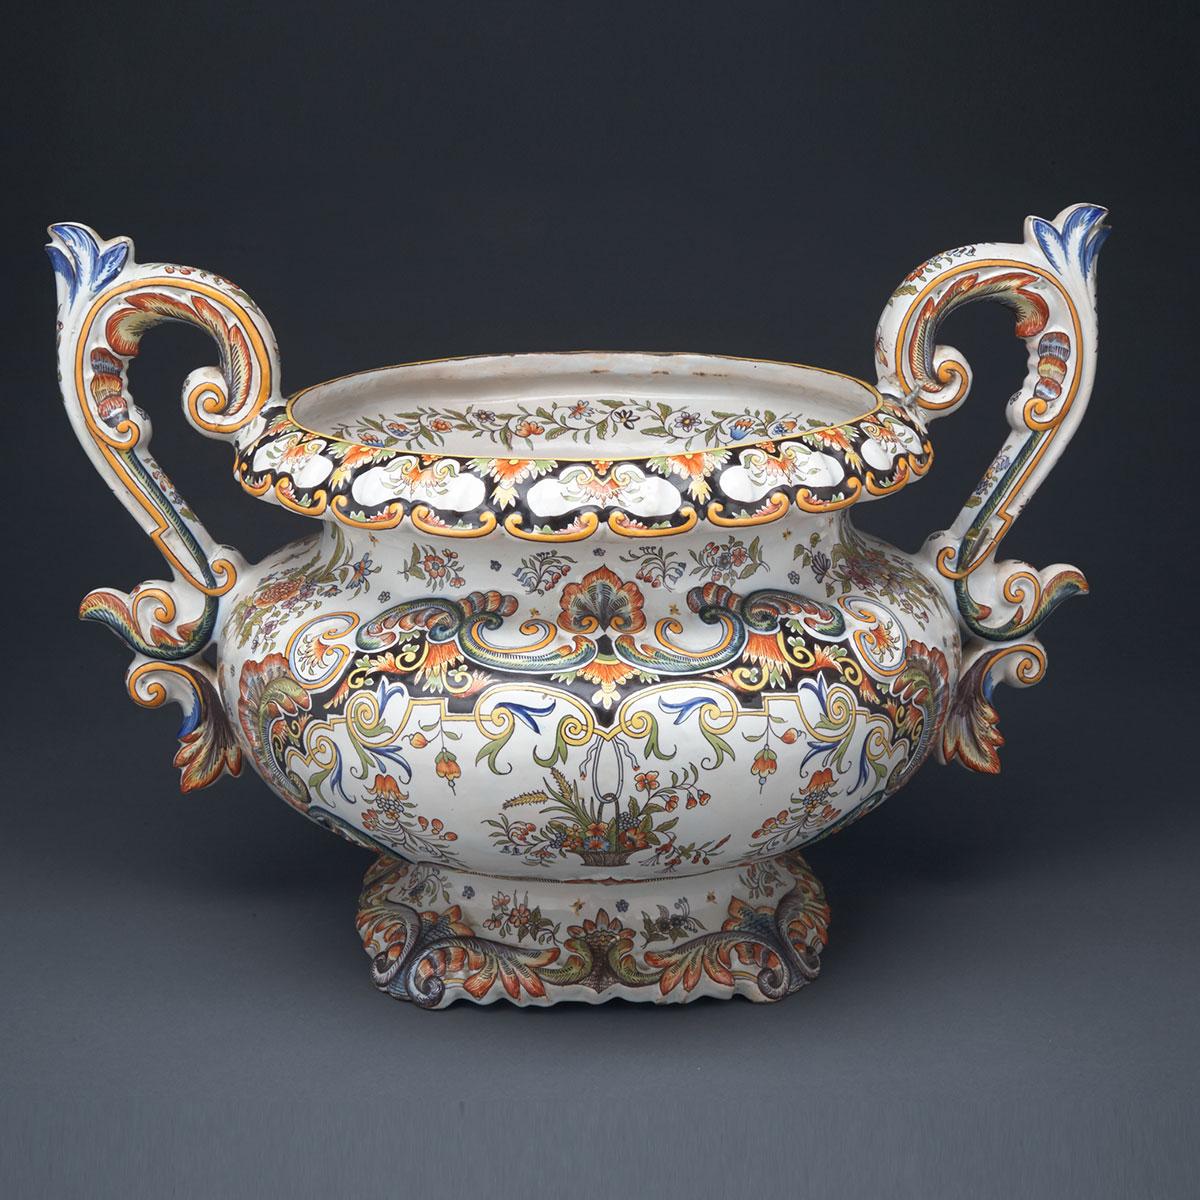 Rouen Faience Two-Handled Jardinière, late 19th century